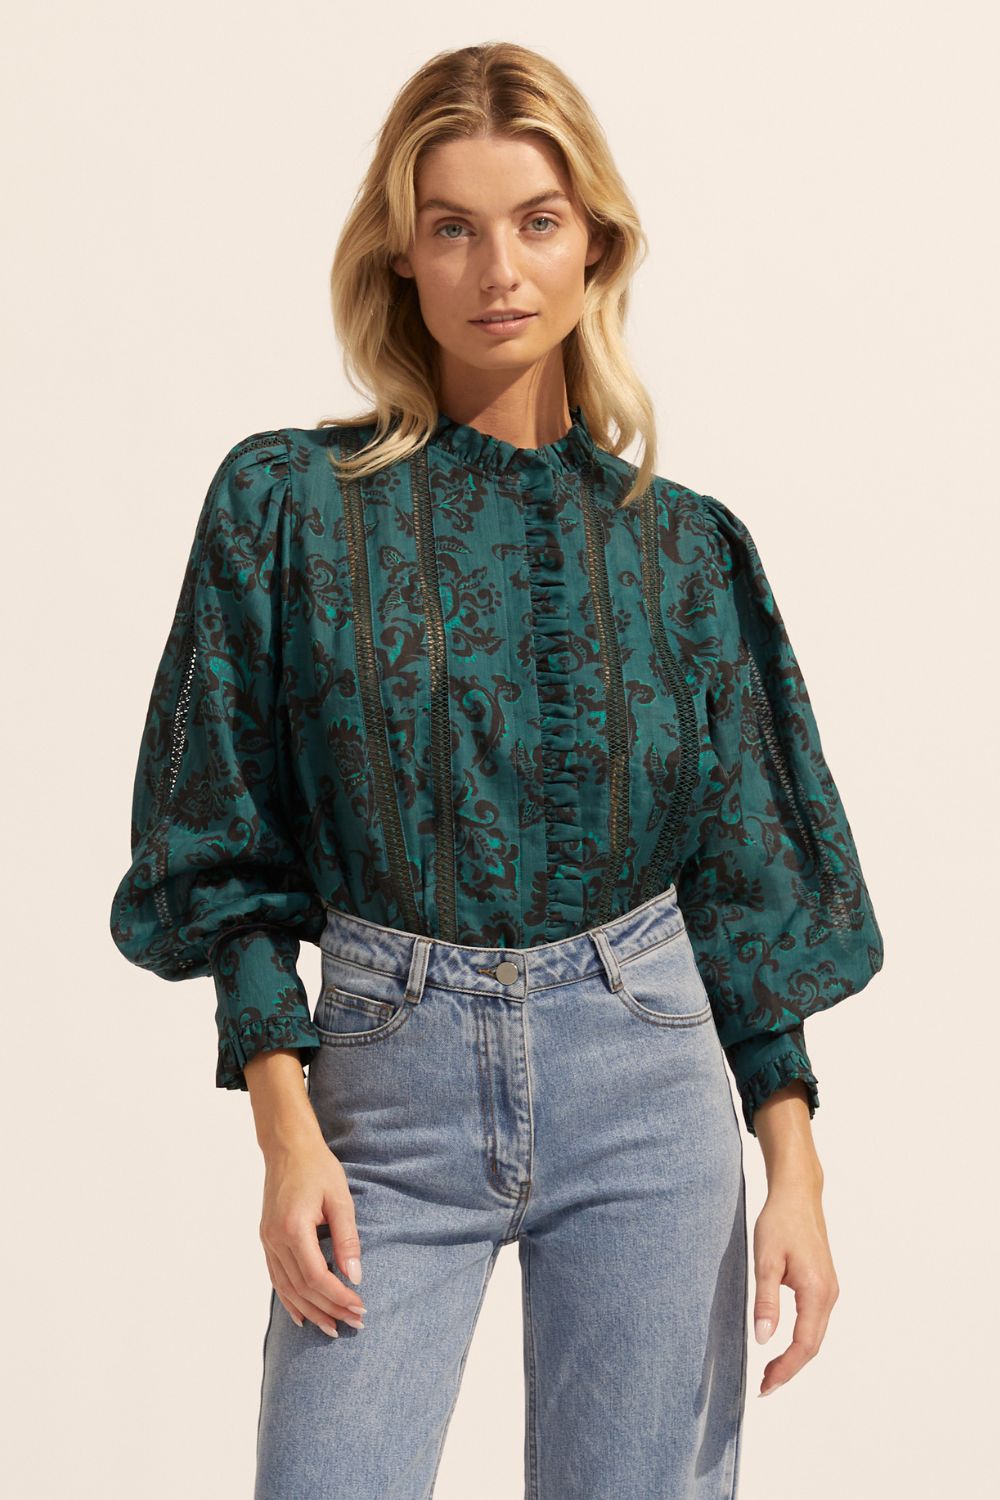 swoon top - green floral